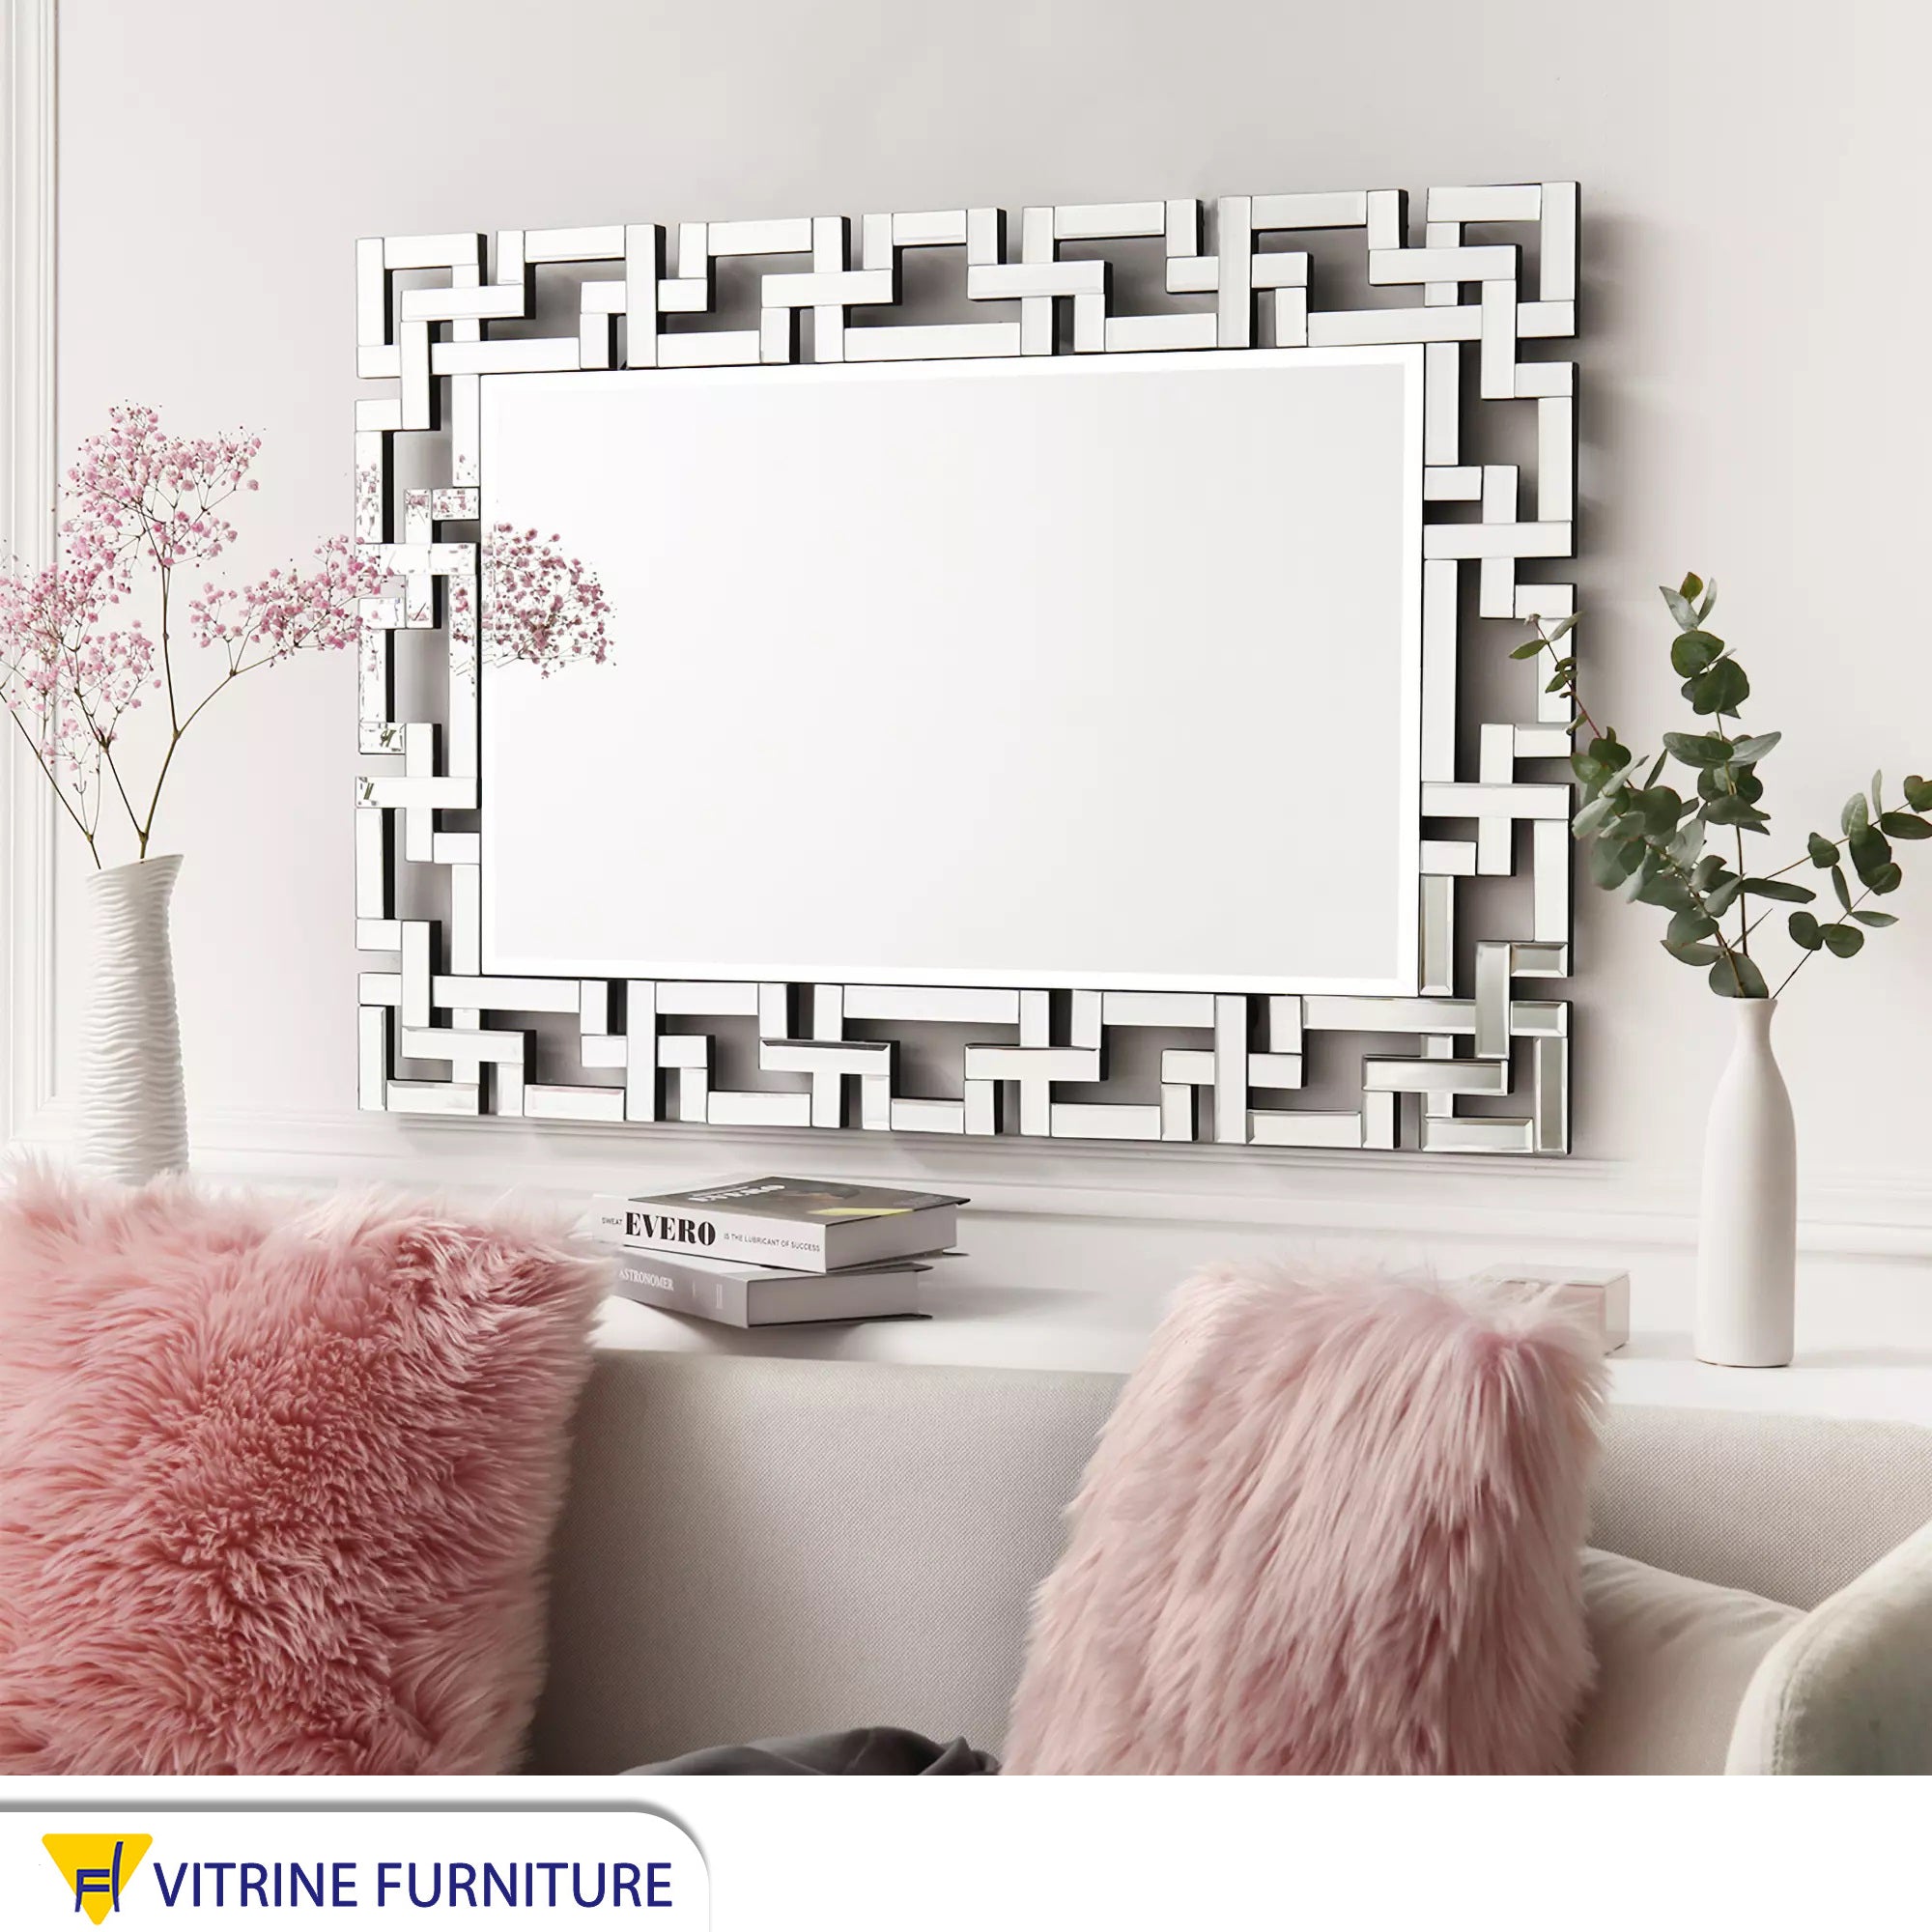 Rectangular mirror with a frame of geometric shapes